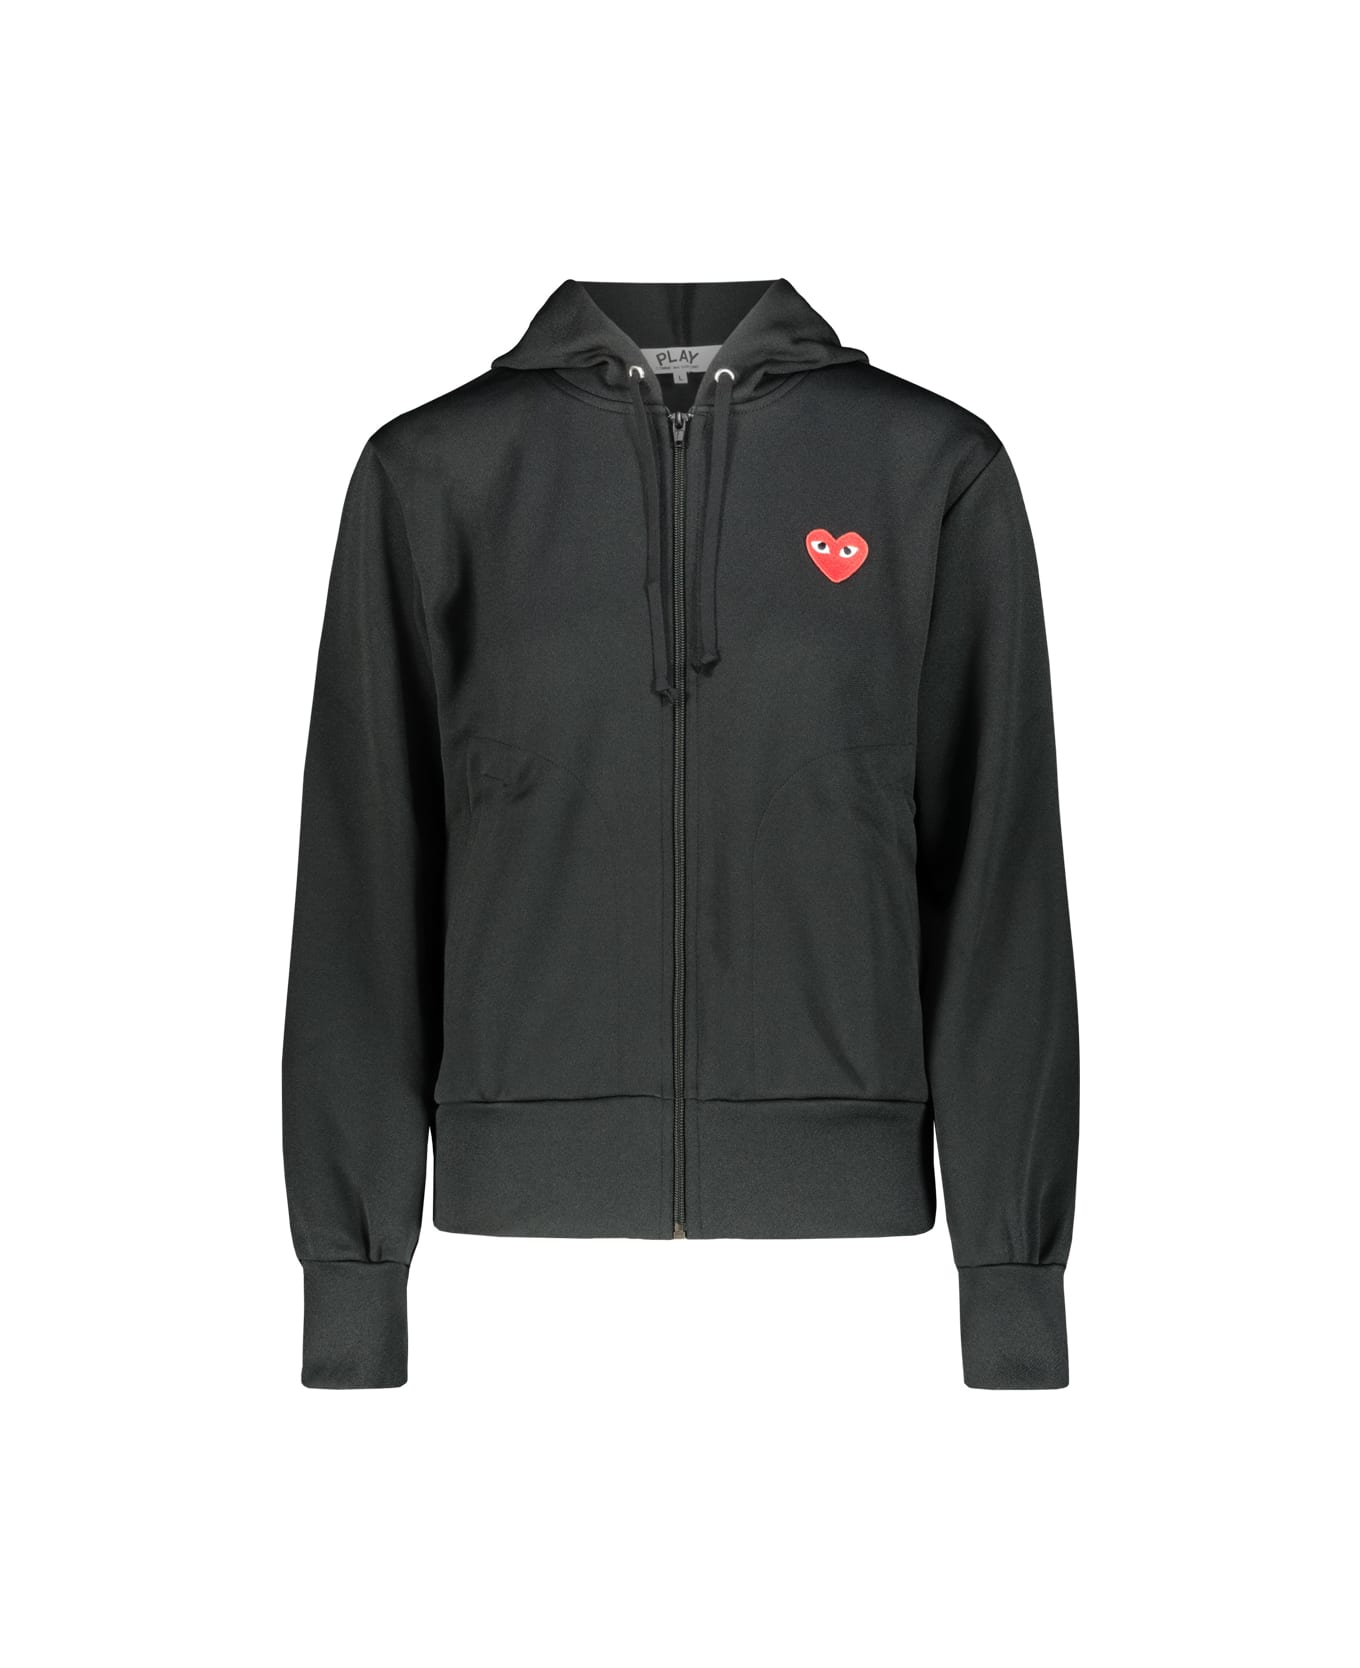 Comme des Garçons Play Black Zipped Hoodie With Red Heart - Blk